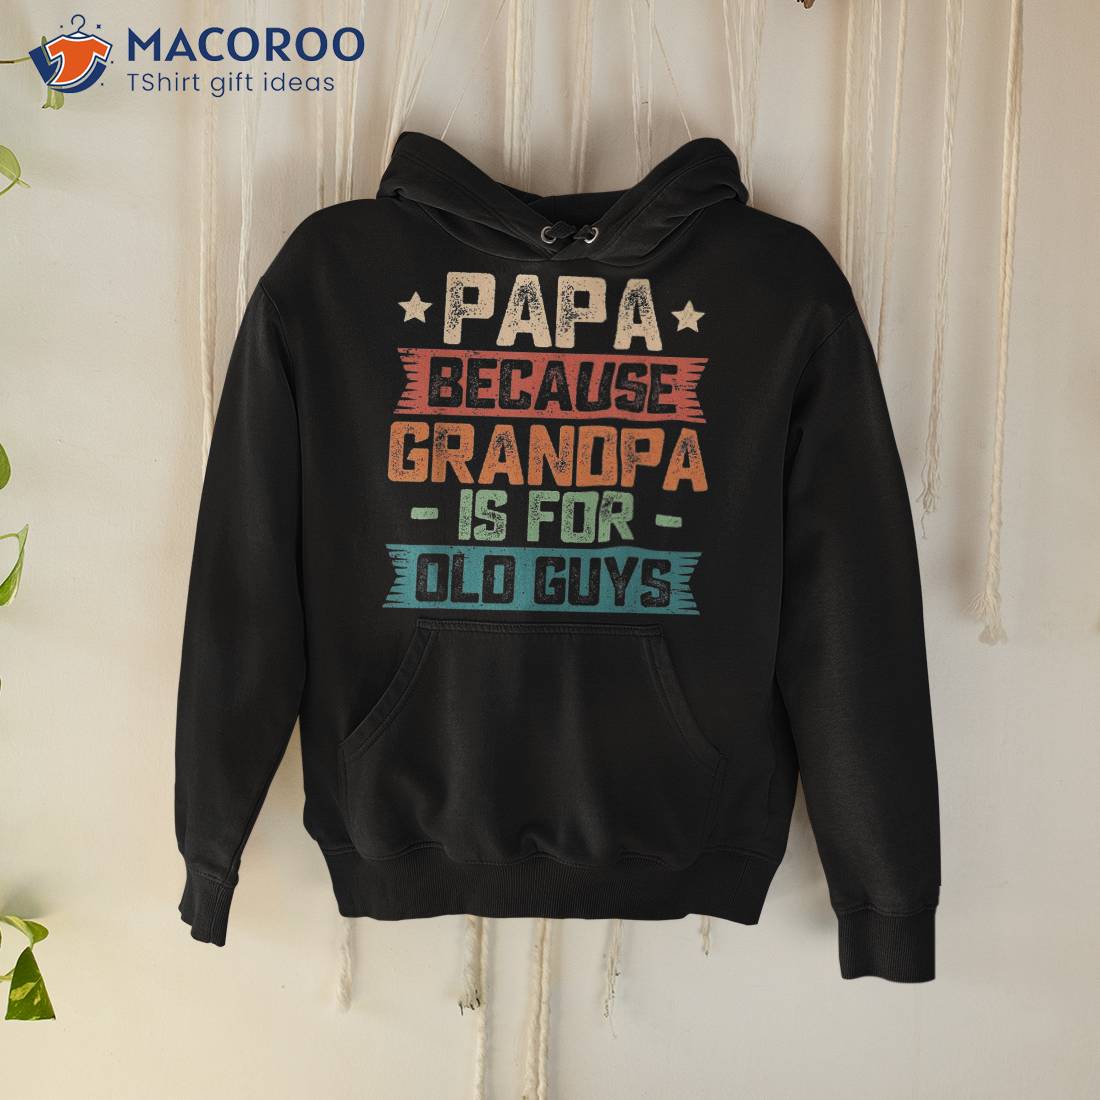 https://images.macoroo.com/wp-content/uploads/2023/06/papa-because-grandpa-is-for-old-guys-vintage-funny-dad-gift-shirt-hoodie.jpg